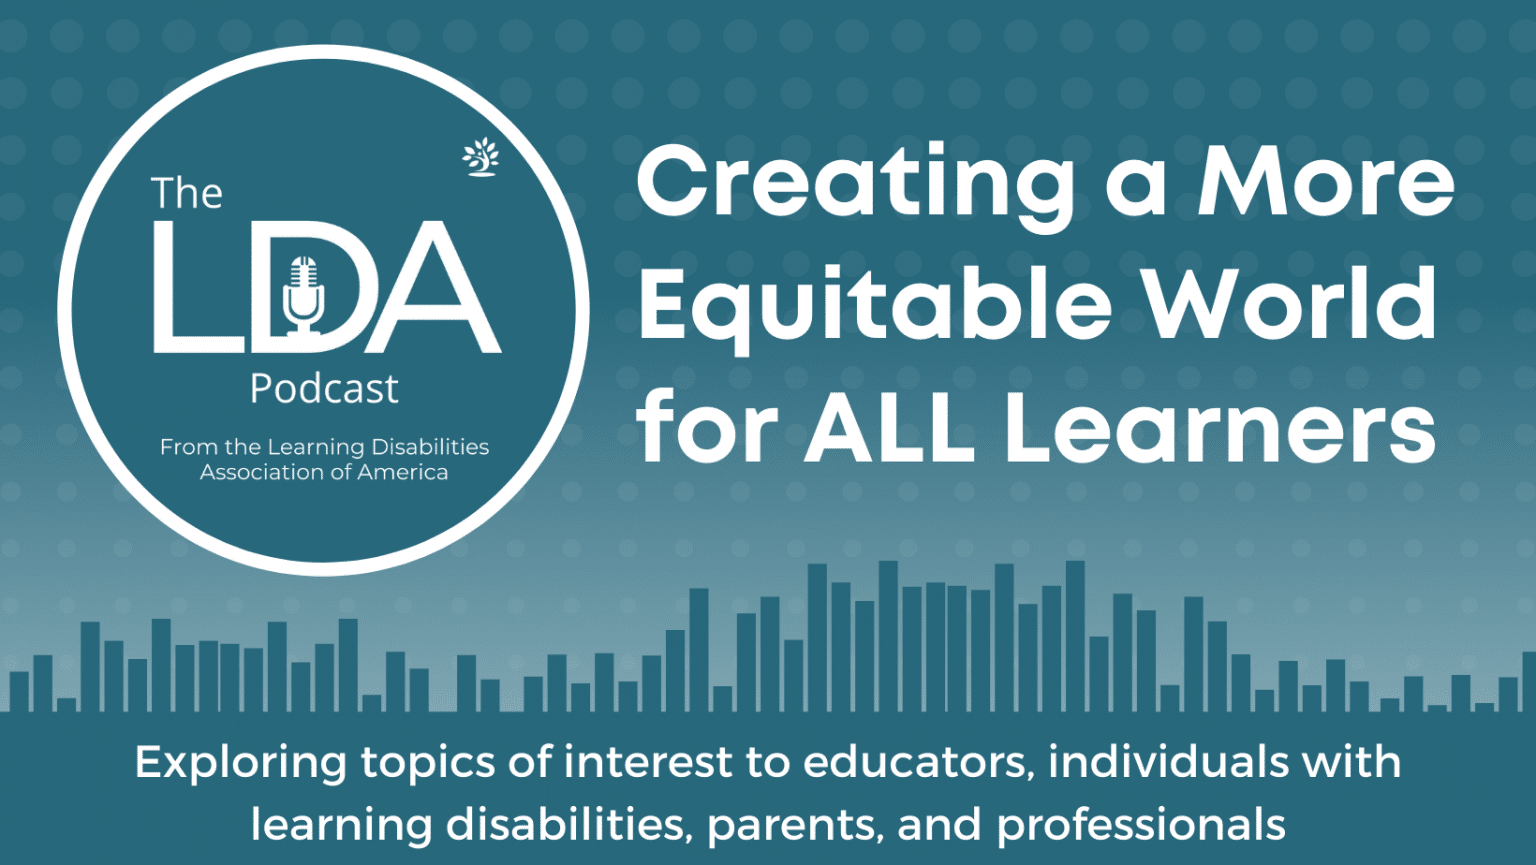 LDA Podcast Title Page, blue background and text stating "Creating a More Equitable World for ALL Learners"